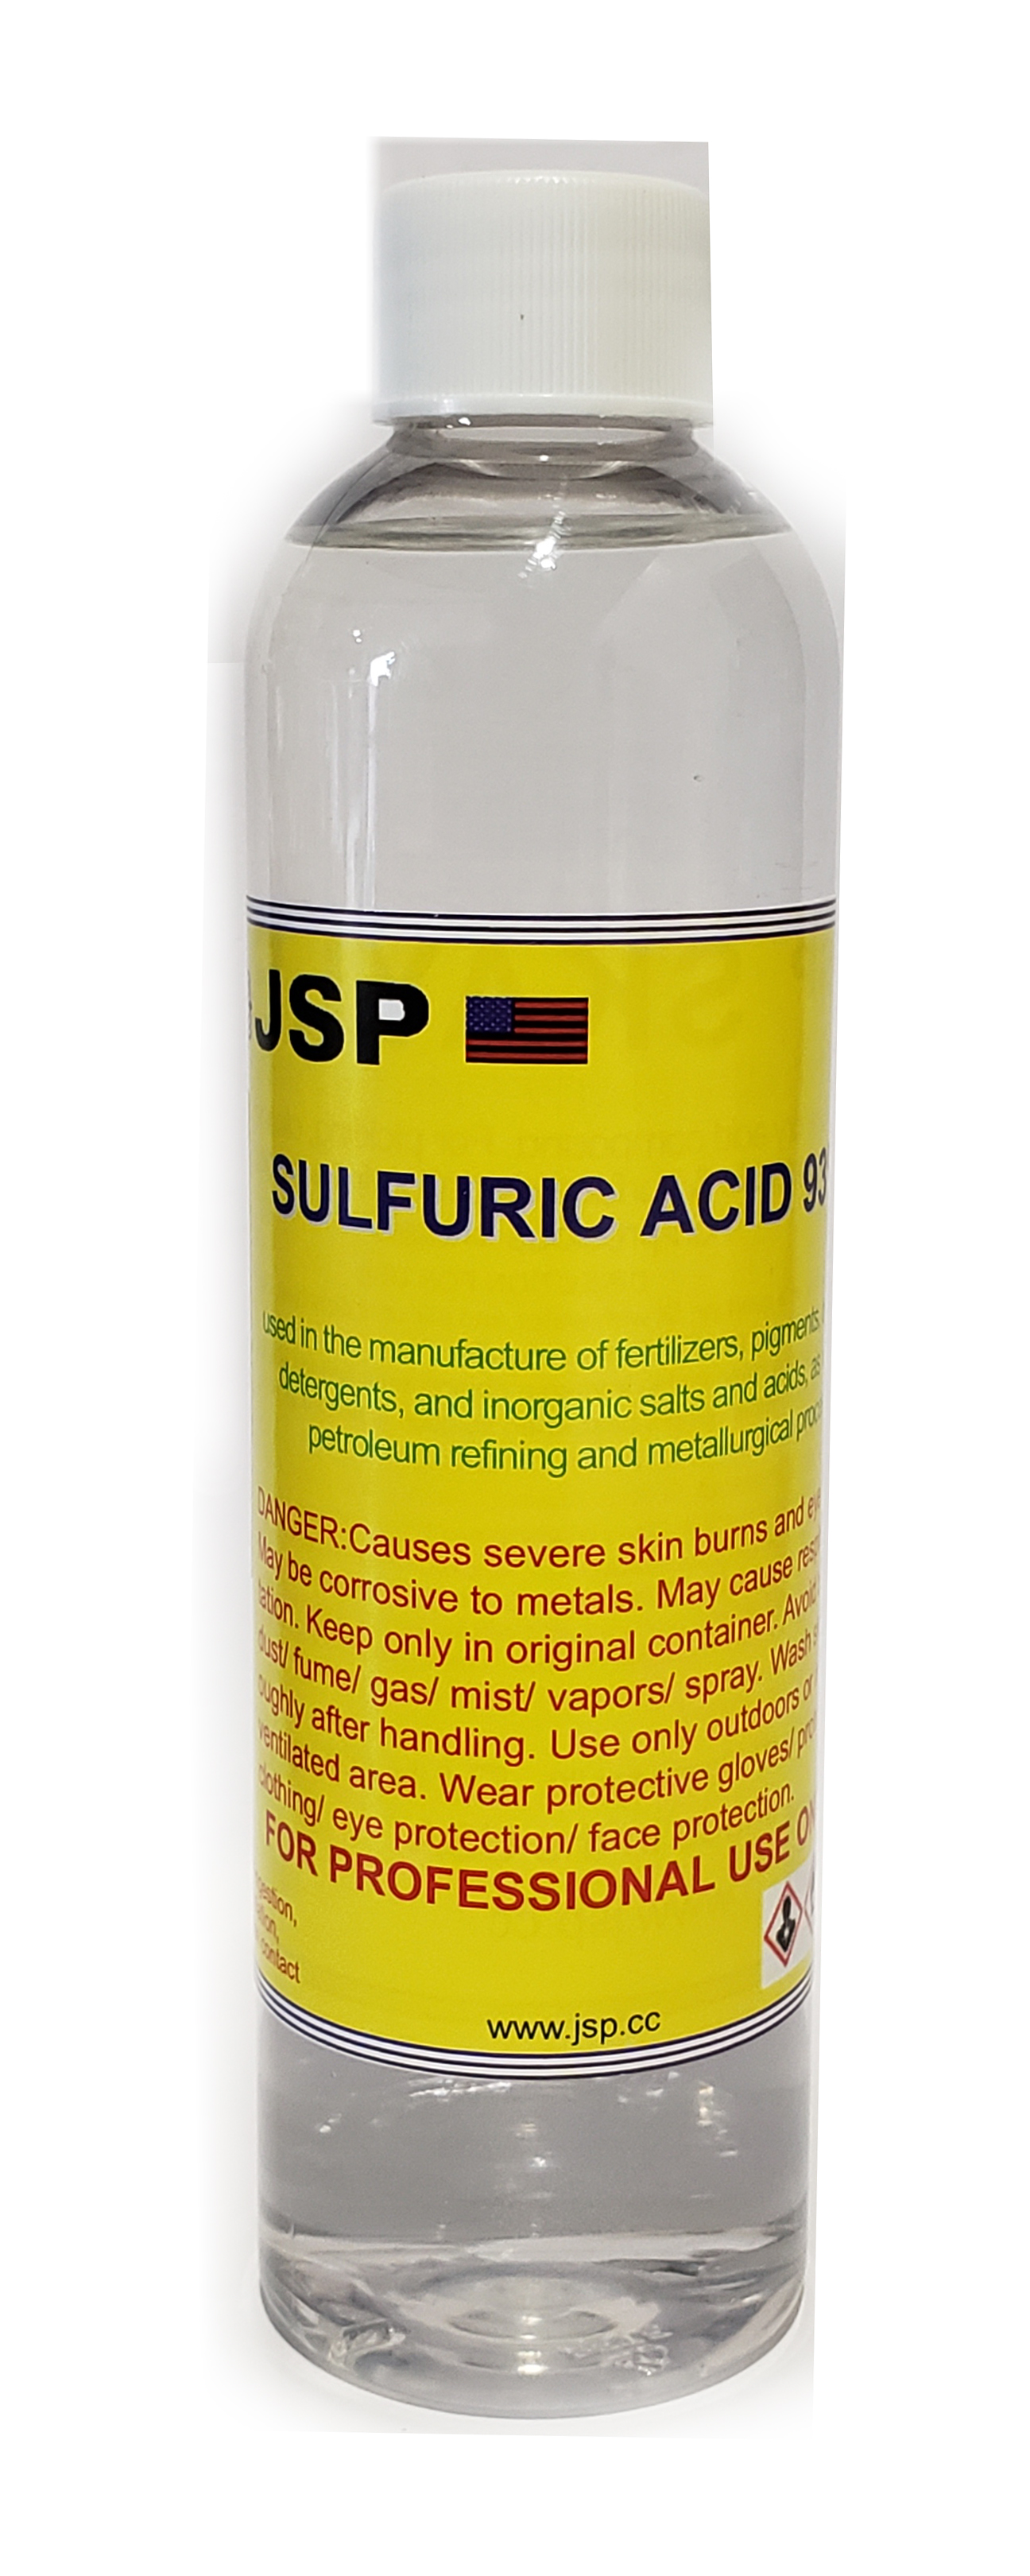 SULFURIC ACID 66be 96% 16 oz - Click Image to Close